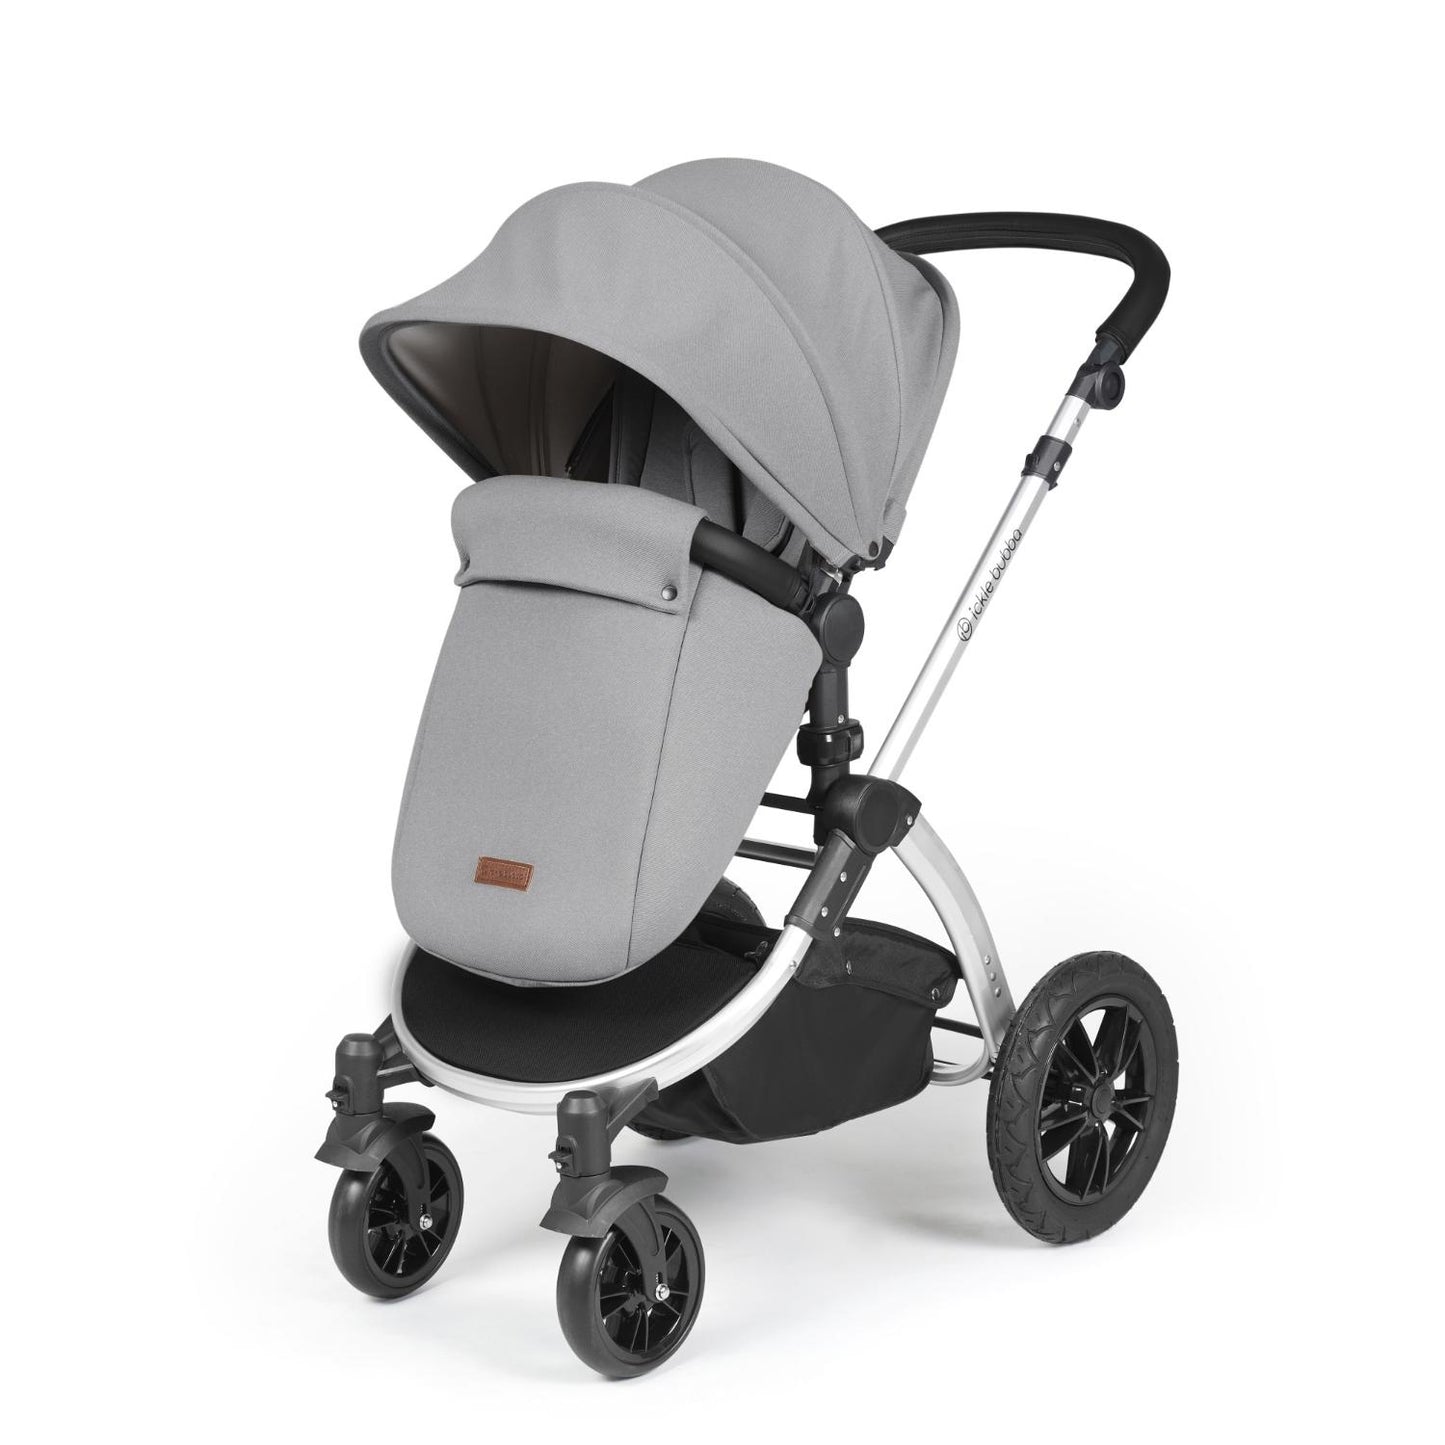 Ickle Bubba Stomp Luxe Pushchair with foot warmer attached in Pearl Grey colour with silver chassis